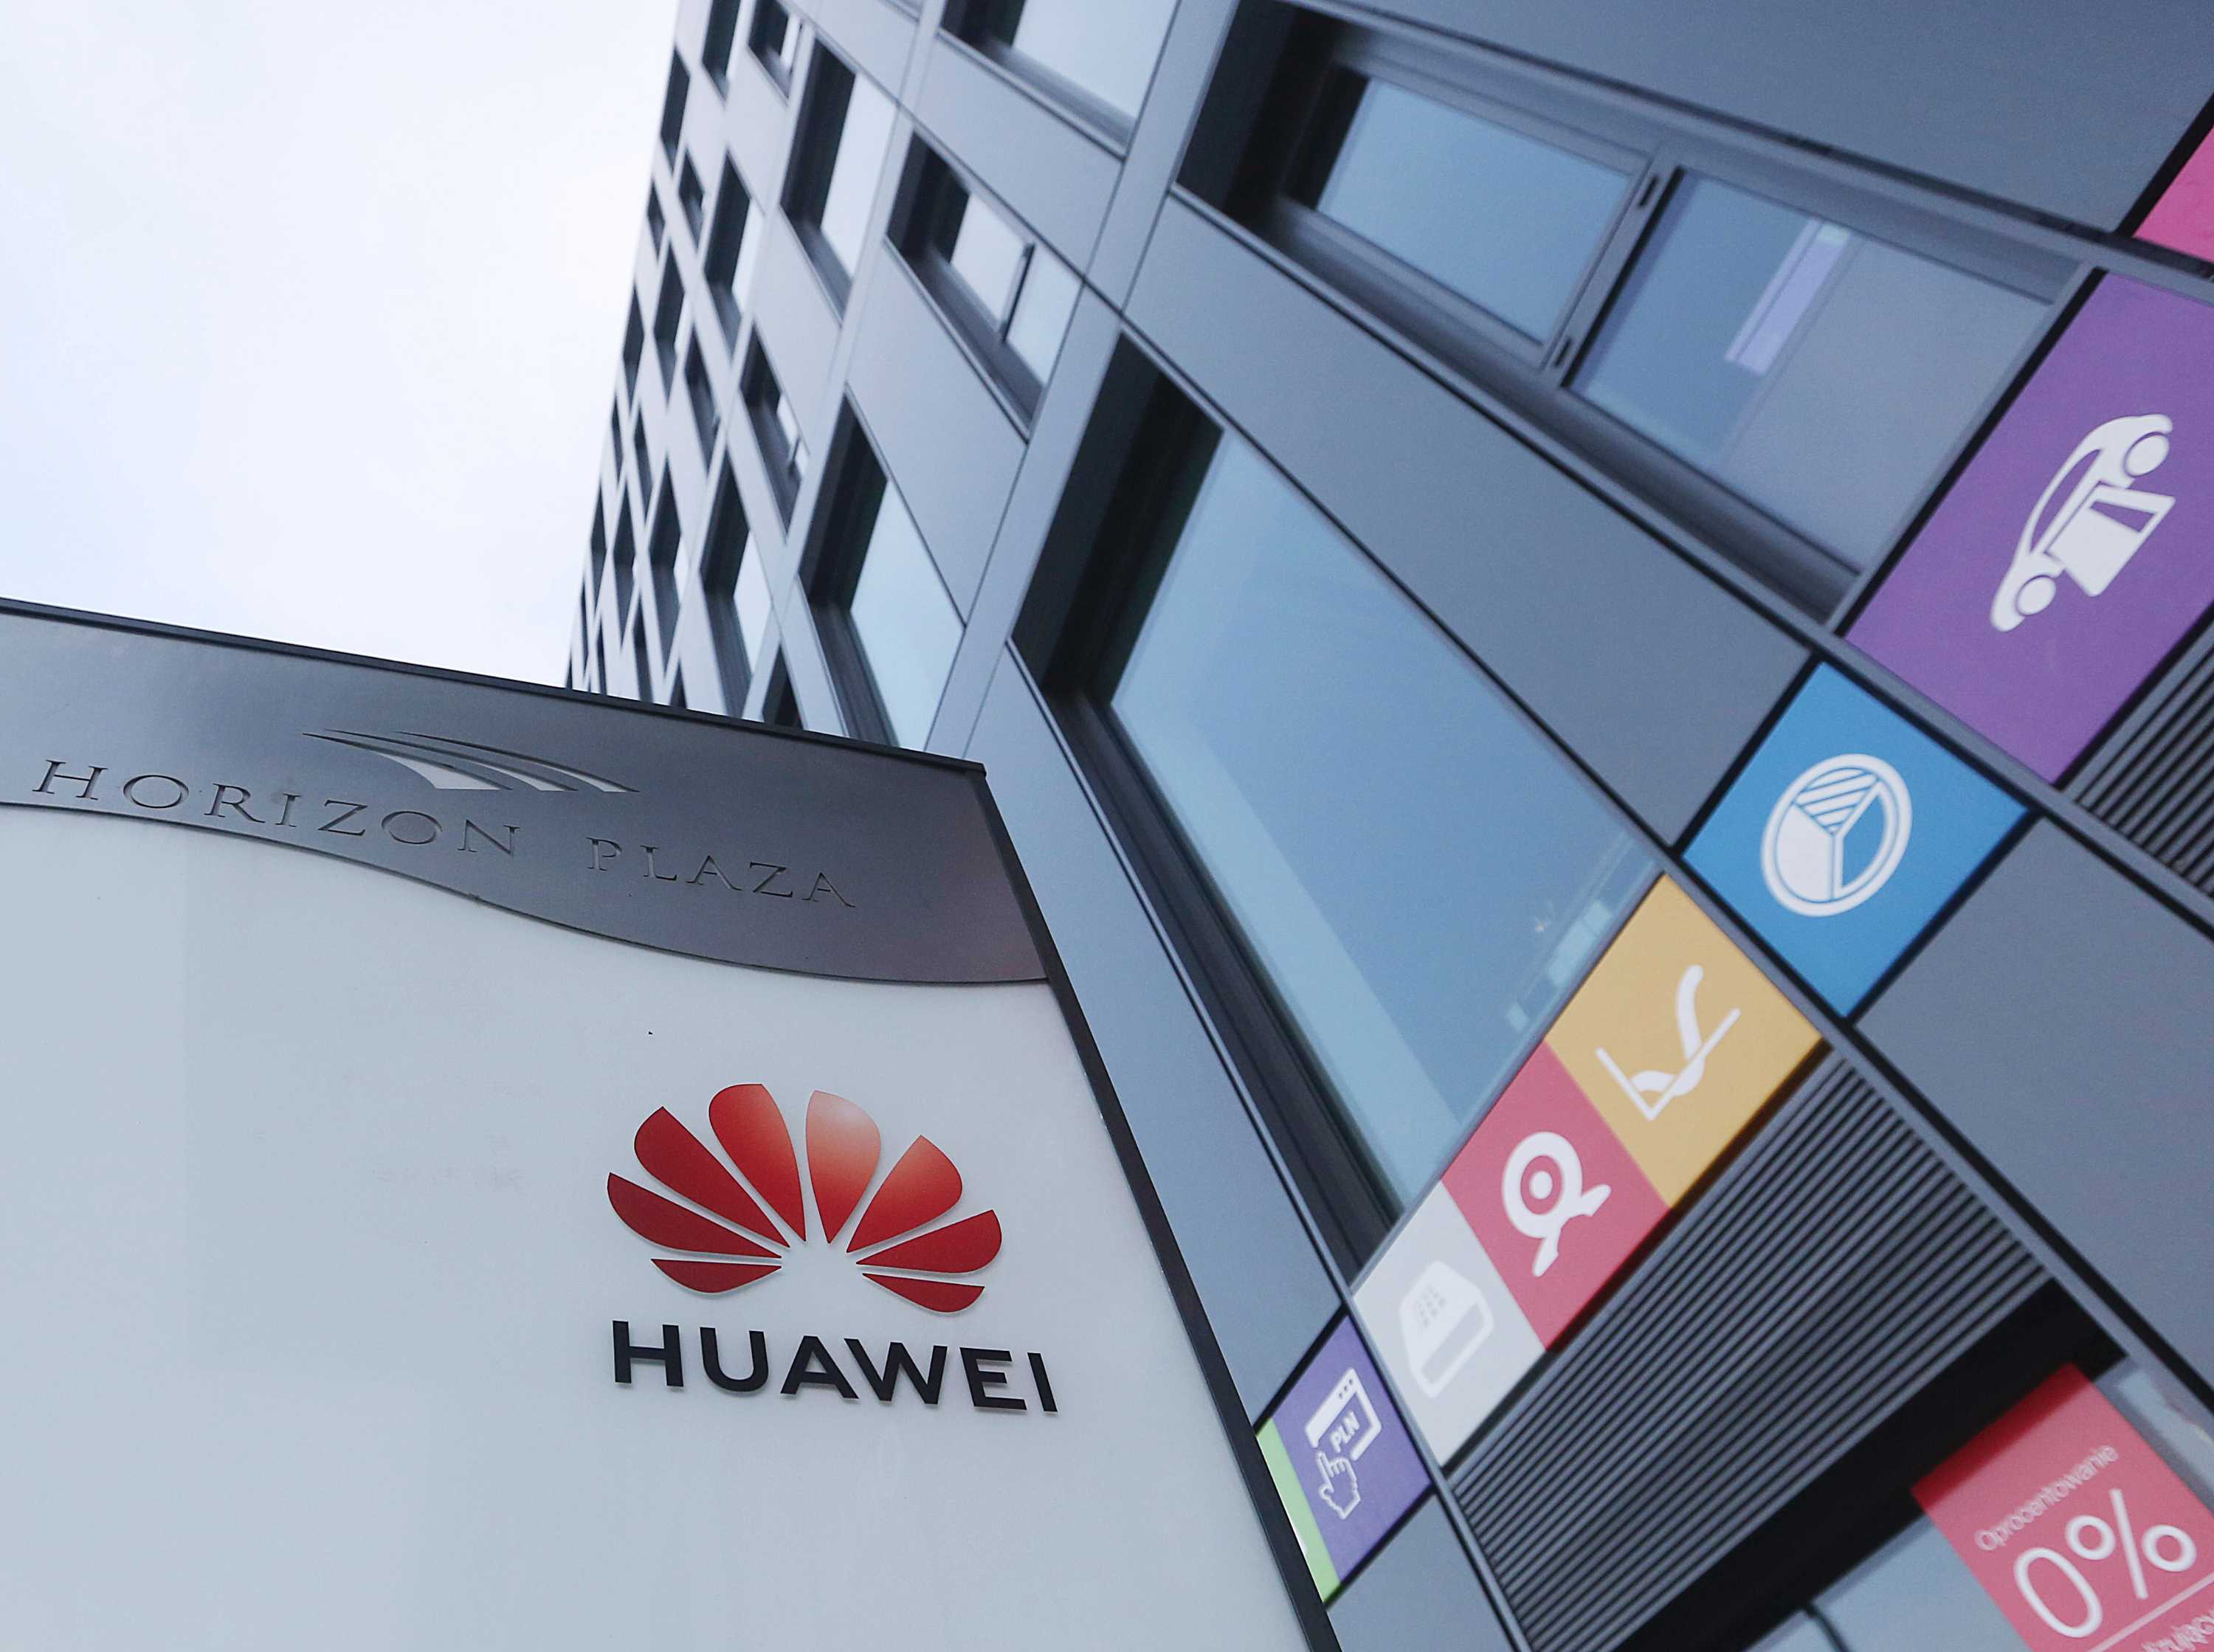 The Huawei logo is displayed in red and black at the main office of Chinese tech giant Huawei